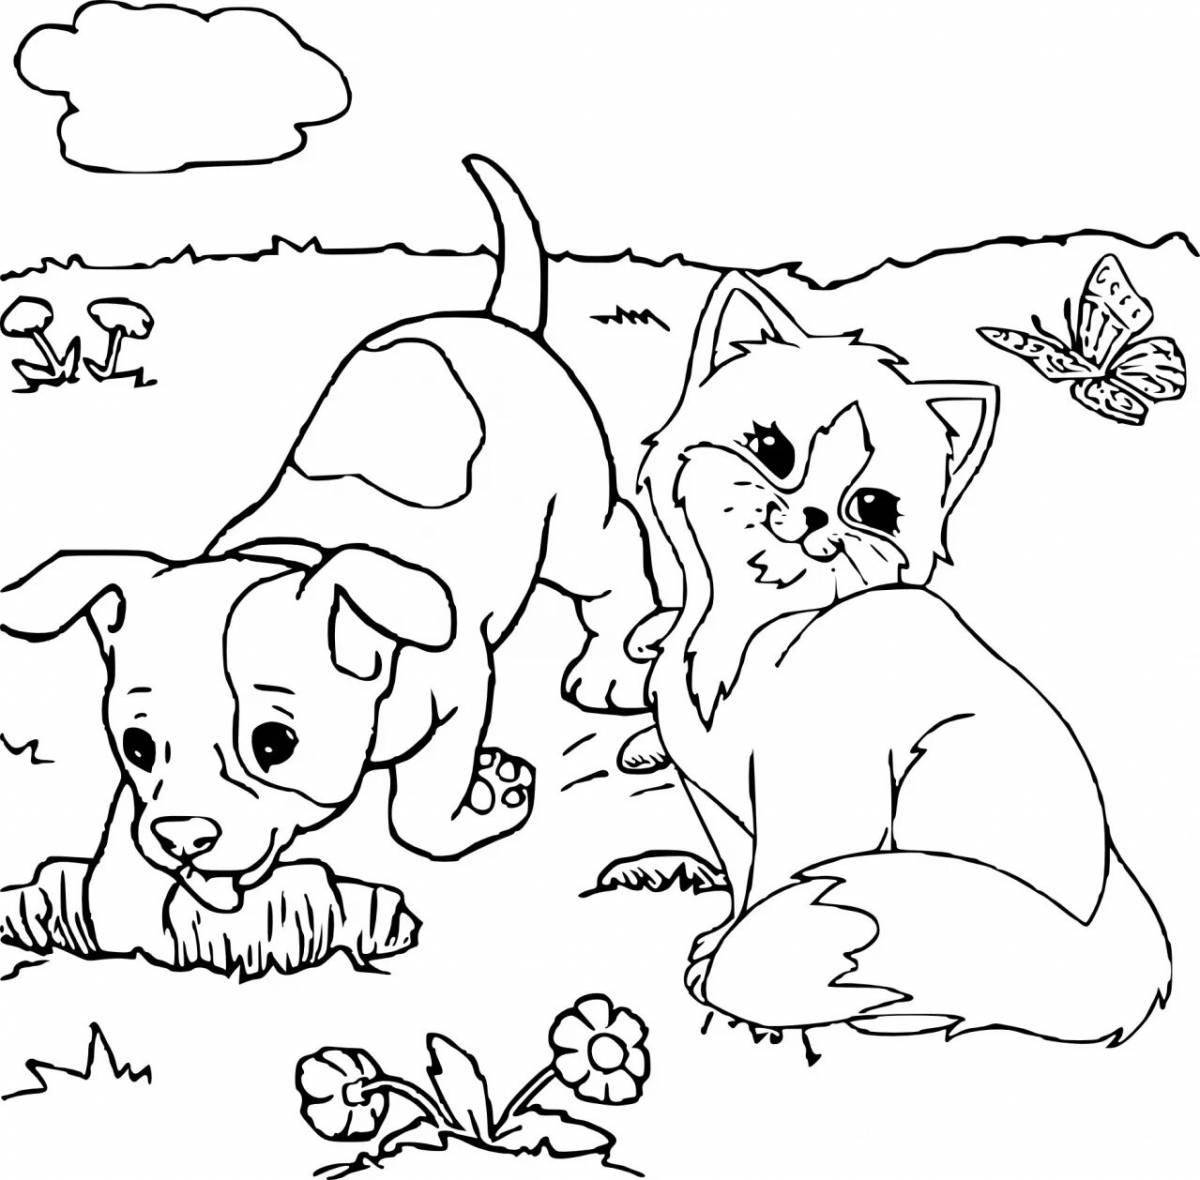 Fun coloring for girls 7 years old animals